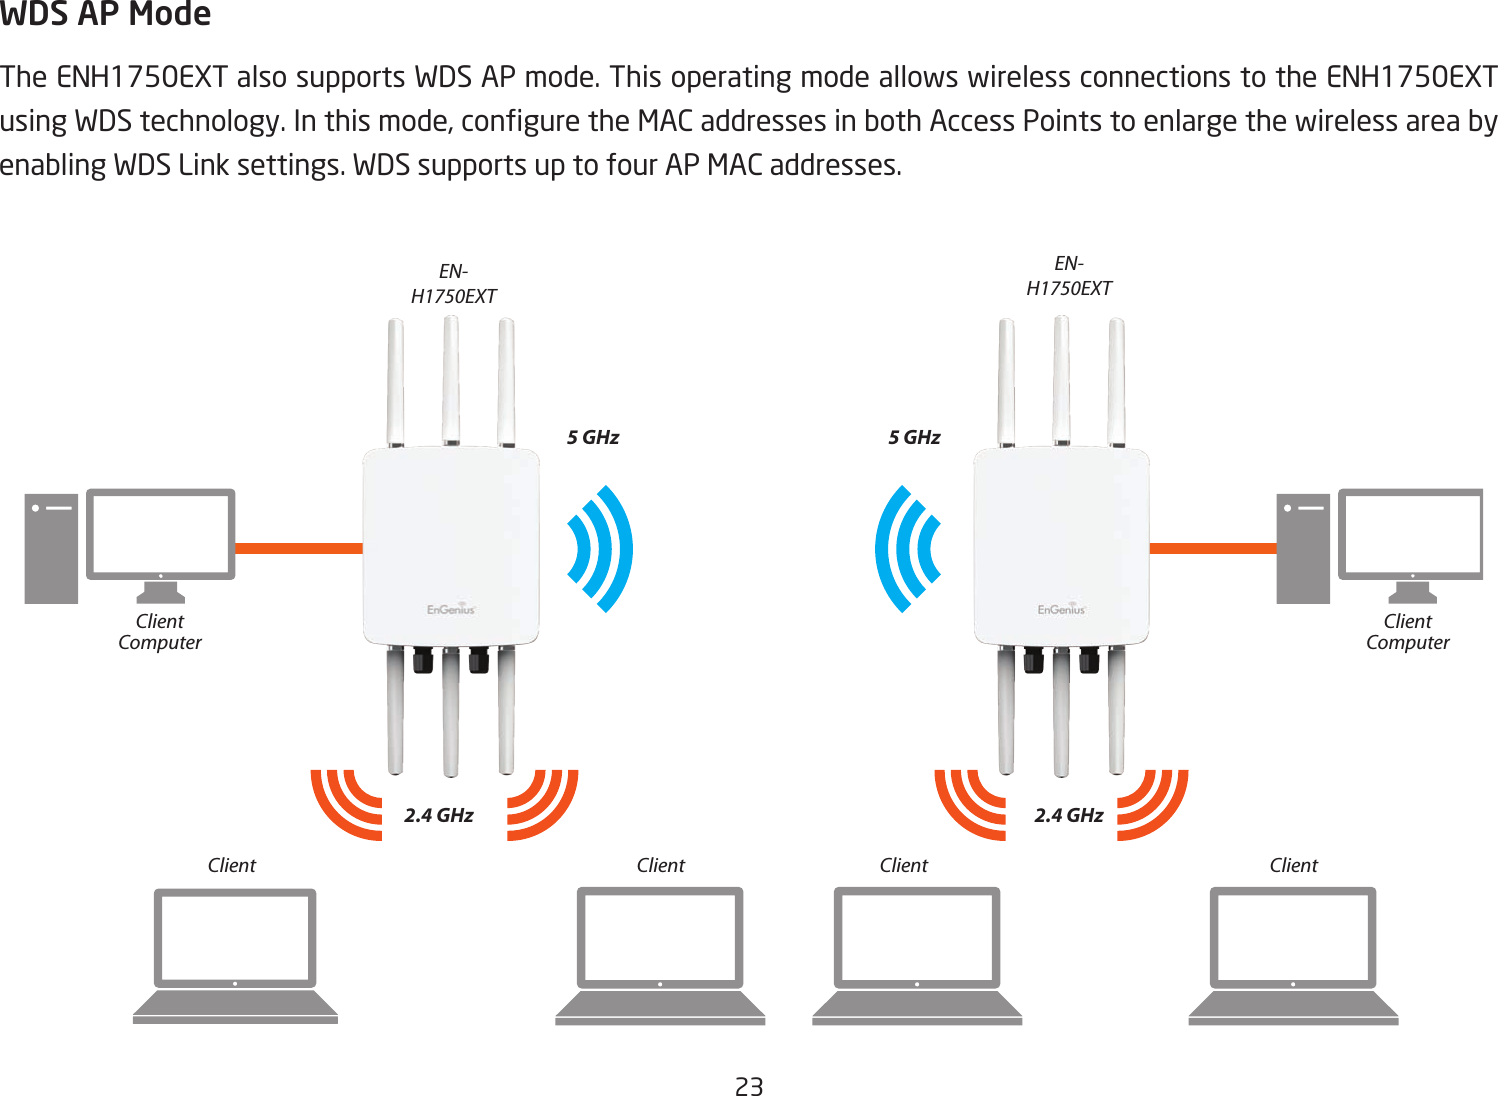 23WDS AP ModeThe ENH1750EXT also supports WDS AP mode. This operating mode allows wireless connections to the ENH1750EXT usingWDStechnology.Inthismode,conguretheMACaddressesinbothAccessPointstoenlargethewirelessareabyenabling WDS Link settings. WDS supports up to four AP MAC addresses.EN-H1750EXTEN-H1750EXT2.4 GHz 2.4 GHz5 GHz 5 GHzClient Client Client ClientClientComputerClientComputer